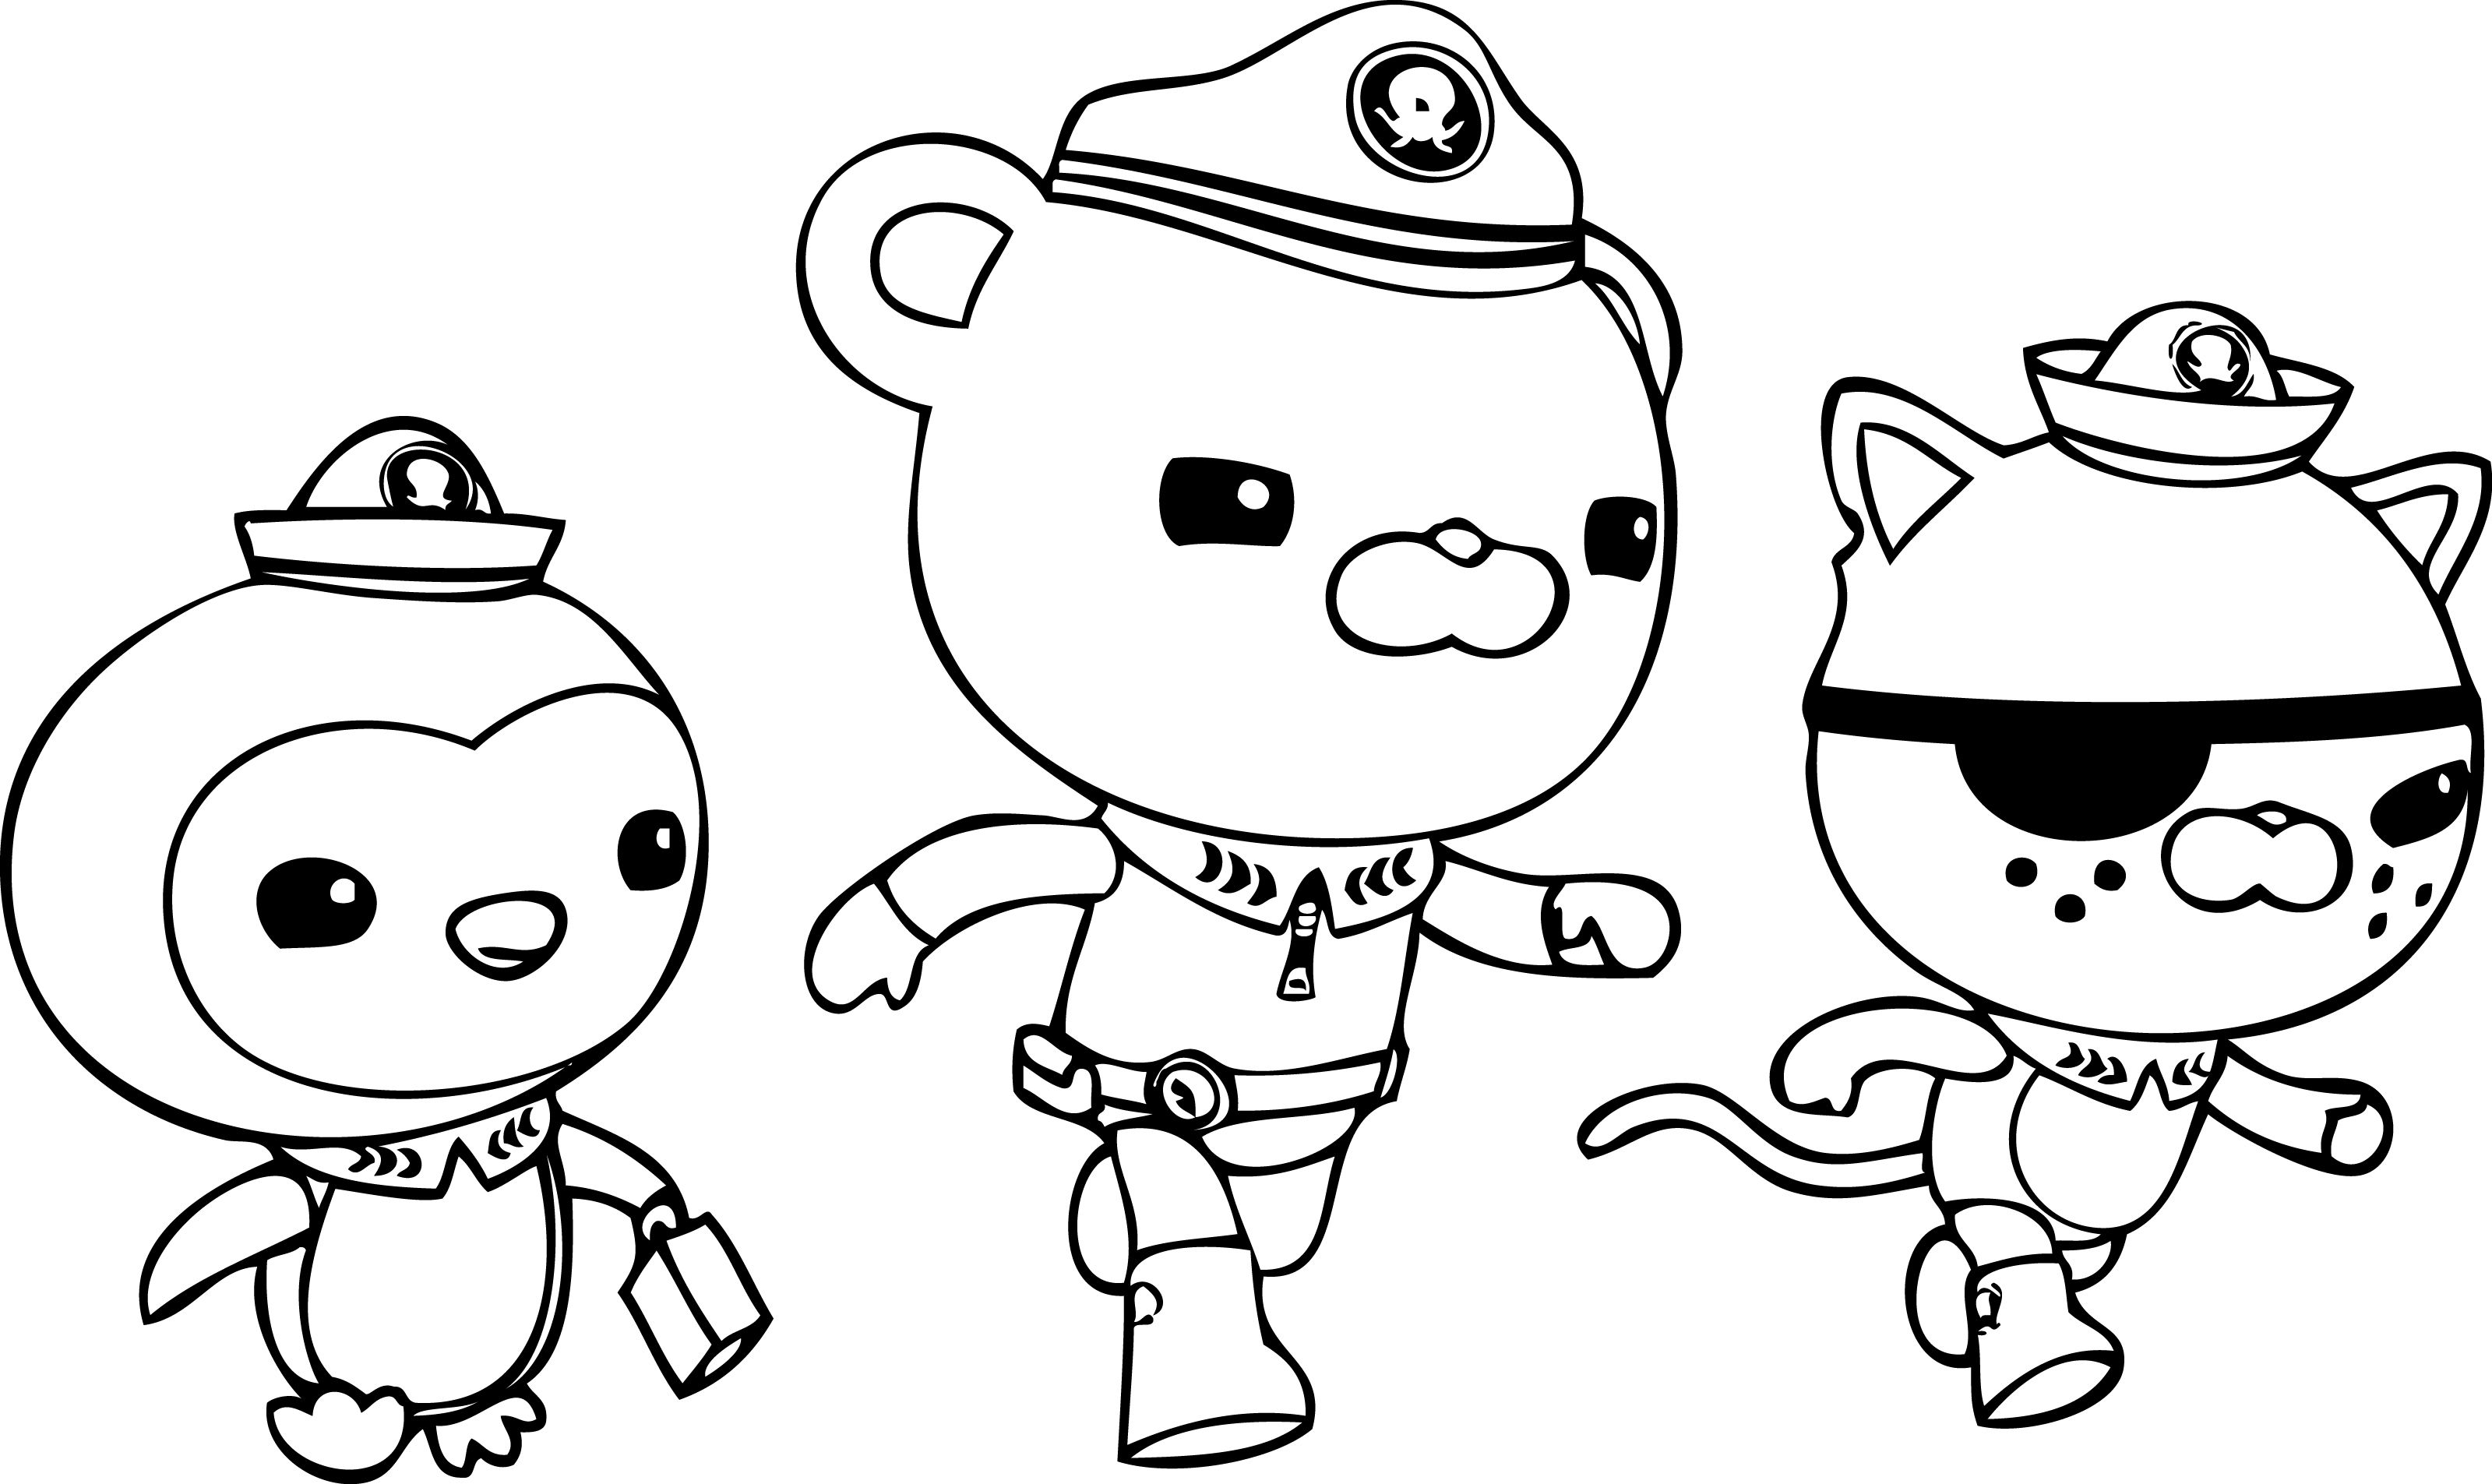 Octonauts coloring pages to download and print for free